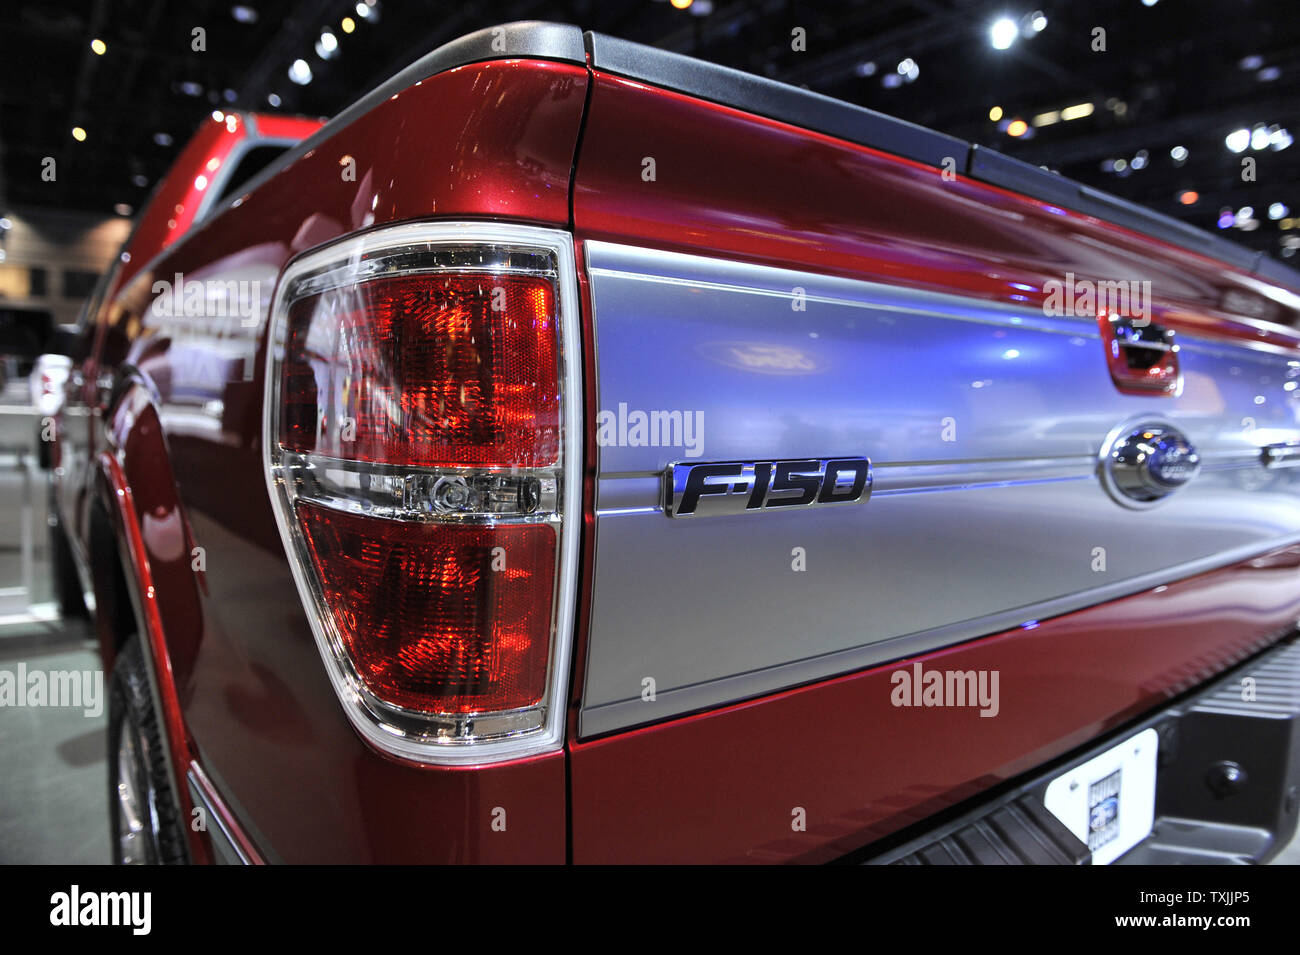 The Ford F-150 Platinum is shown during the Chicago Auto Show at McCormick Place on February 9, 2012 in Chicago.      UPI/Brian Kersey Stock Photo